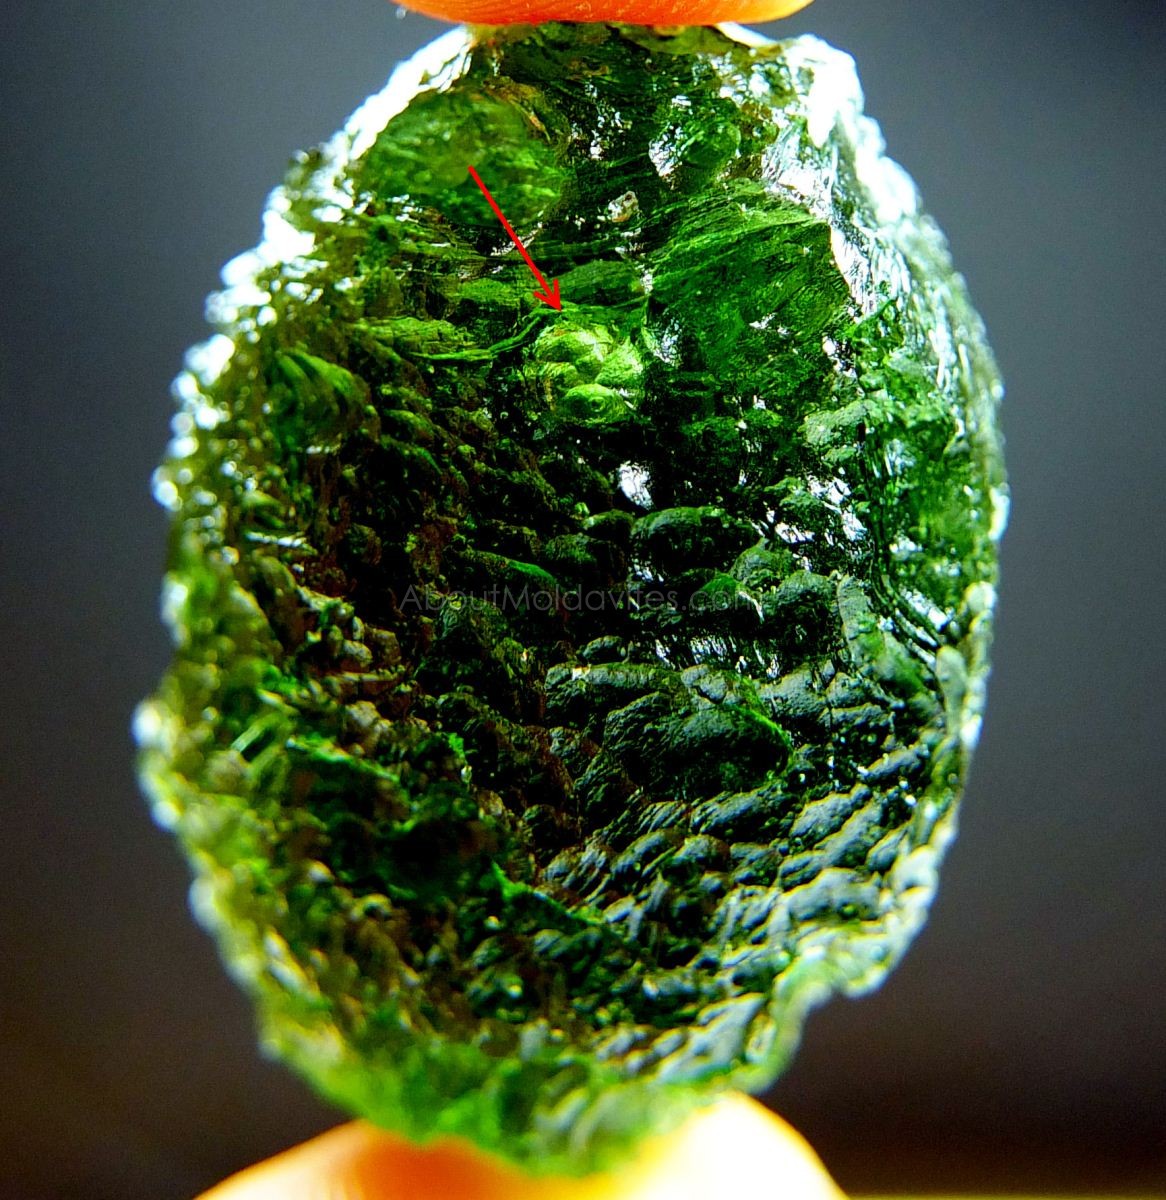 Clesed bubble in moldavite